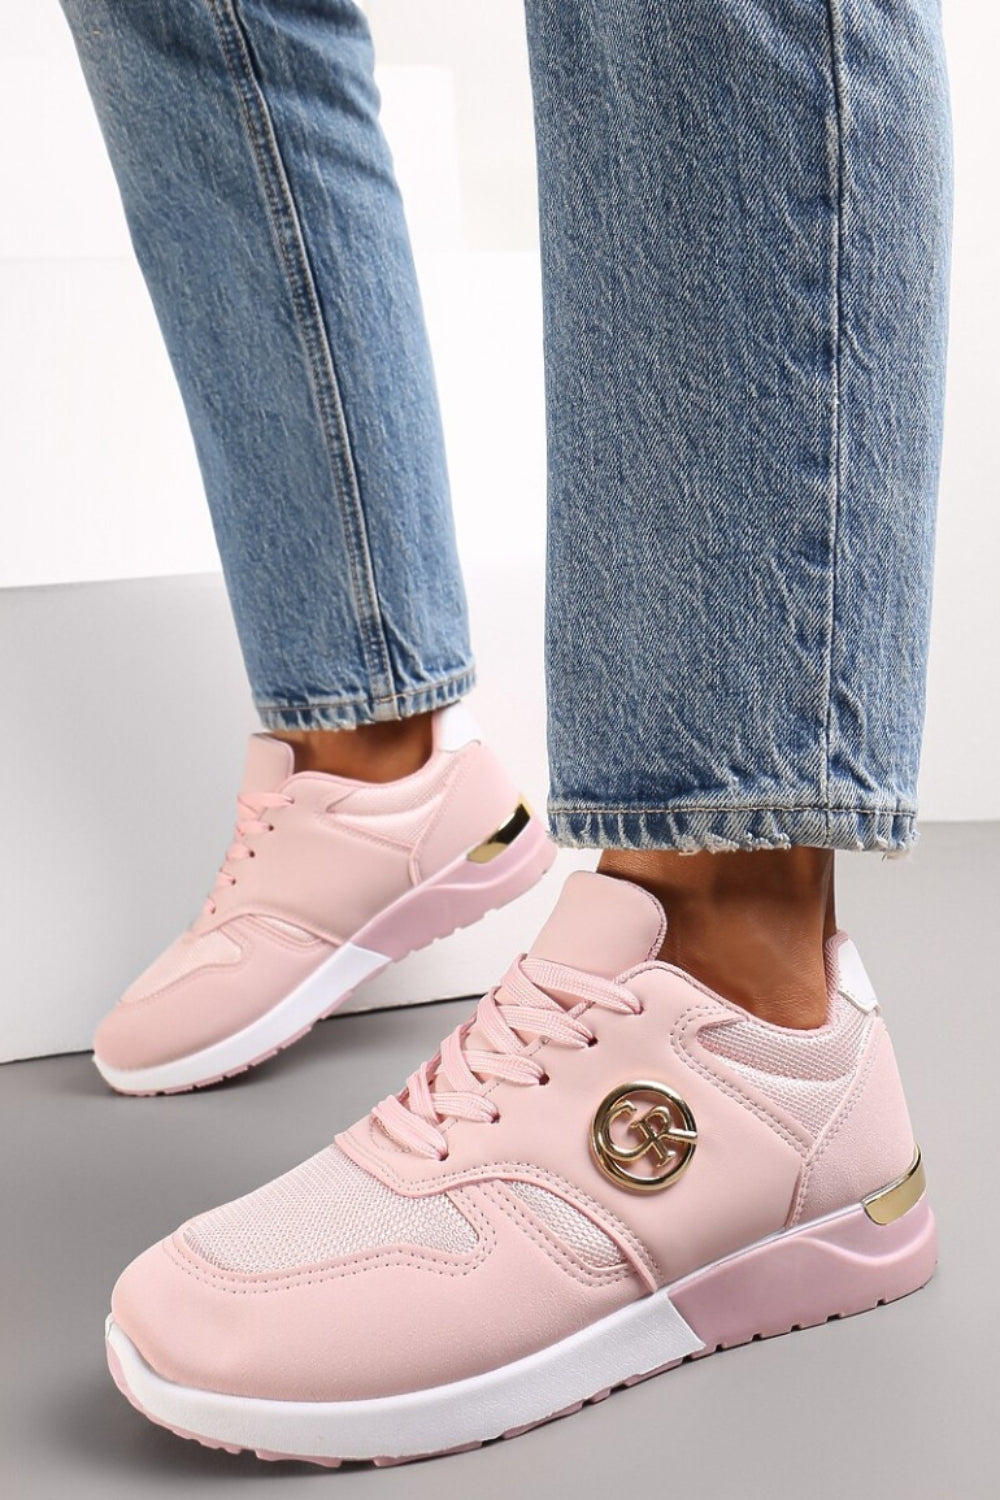 PINK LACE UP TRAINERS WITH GOLD HEEL CLIP